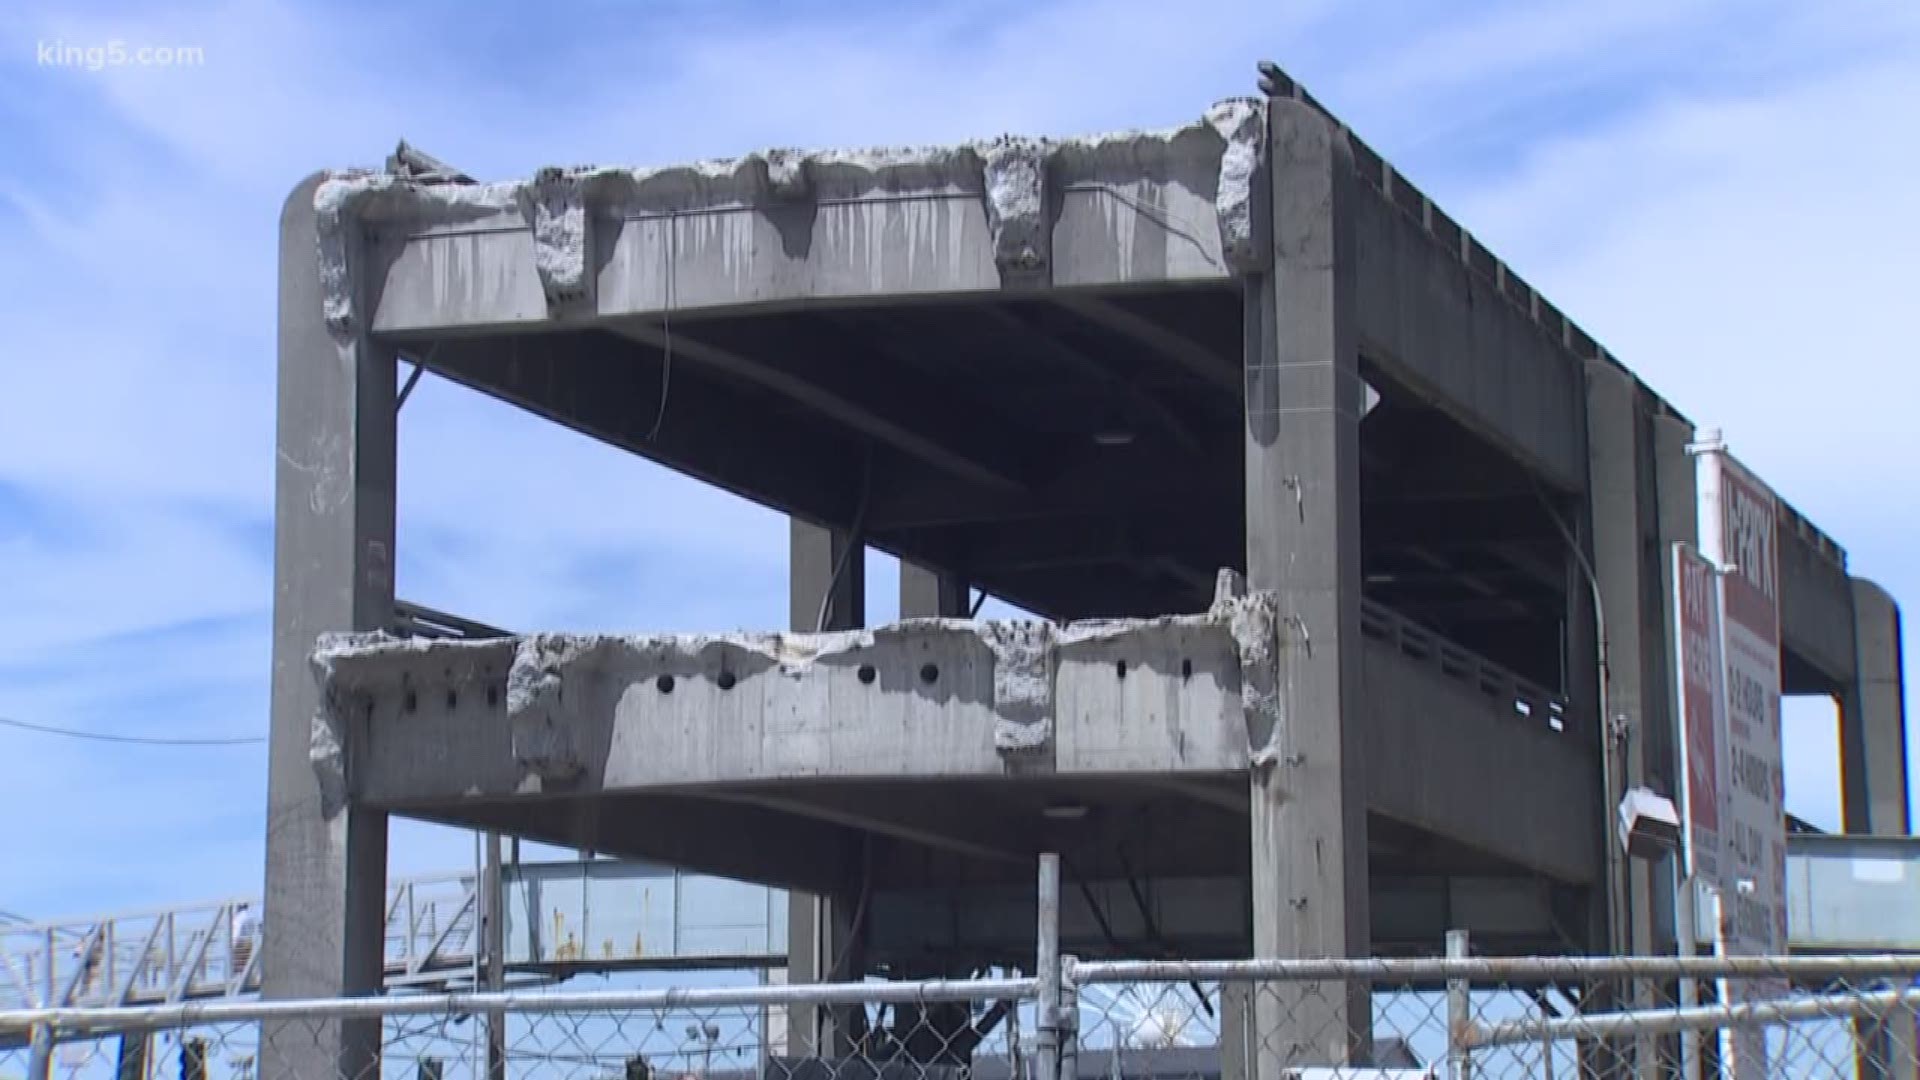 On Friday morning, Alaskan Way is expected to be reduced to one lane each direction between King St. and Dearborn to help the demolition contractor prepare to start tearing down the south end of the viaduct.